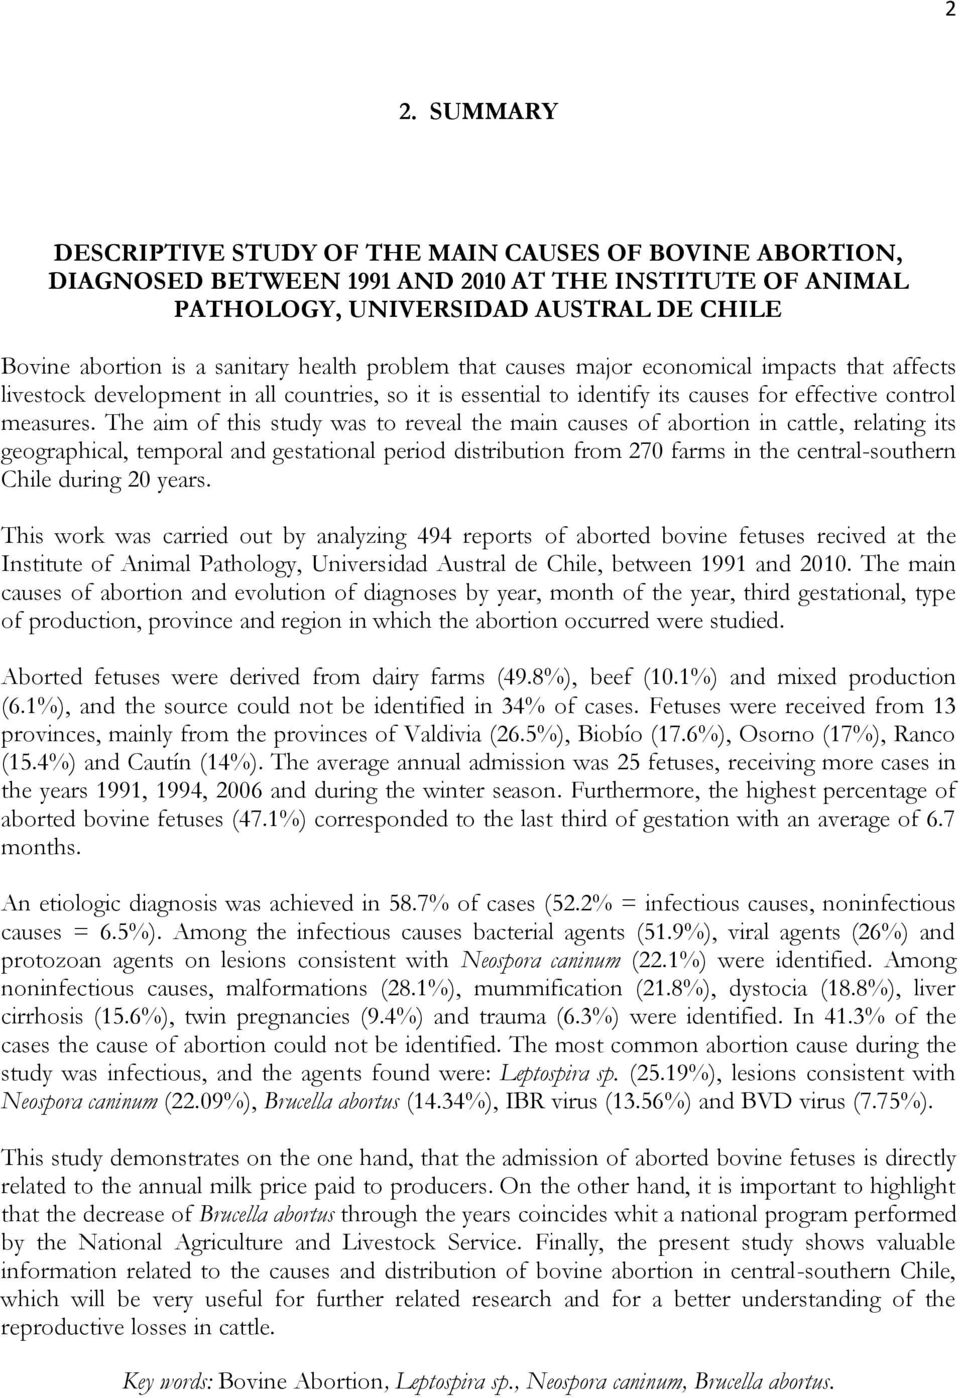 The aim of this study was to reveal the main causes of abortion in cattle, relating its geographical, temporal and gestational period distribution from 27 farms in the central-southern Chile during 2